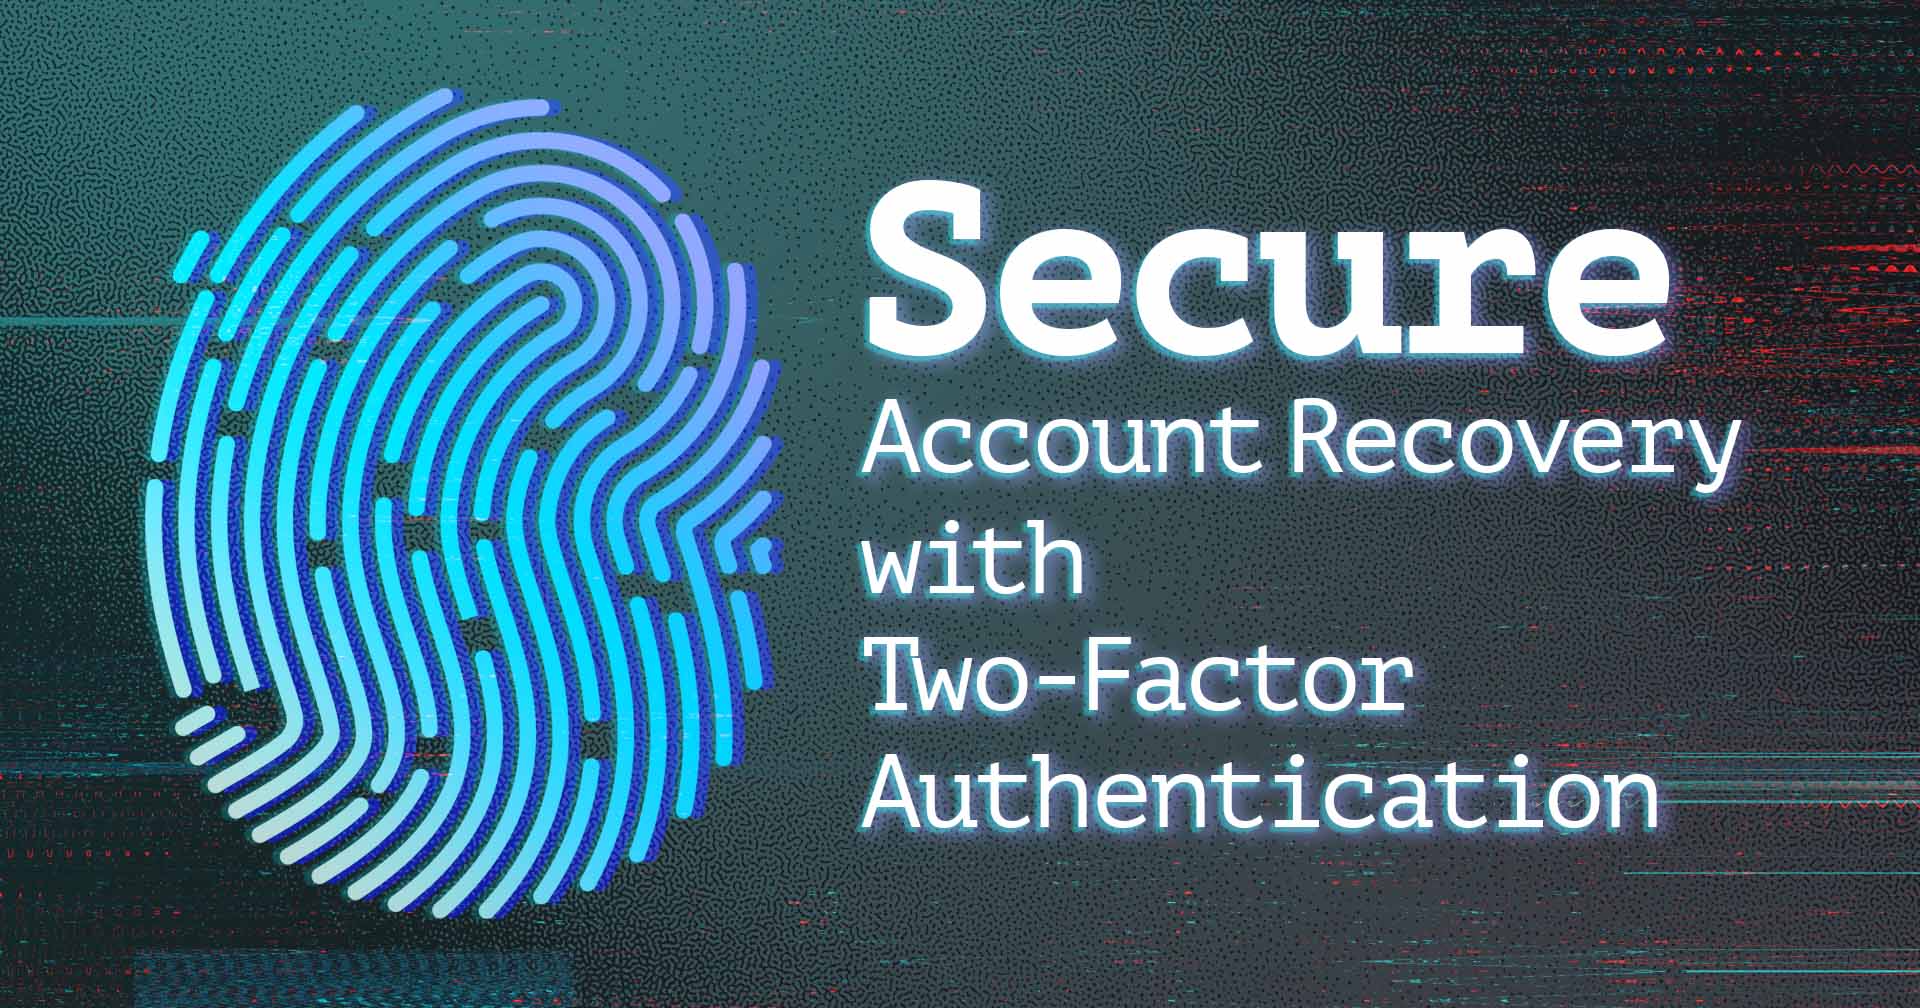 Featured image for Secure Account recovery with Two-Factor Authentication.